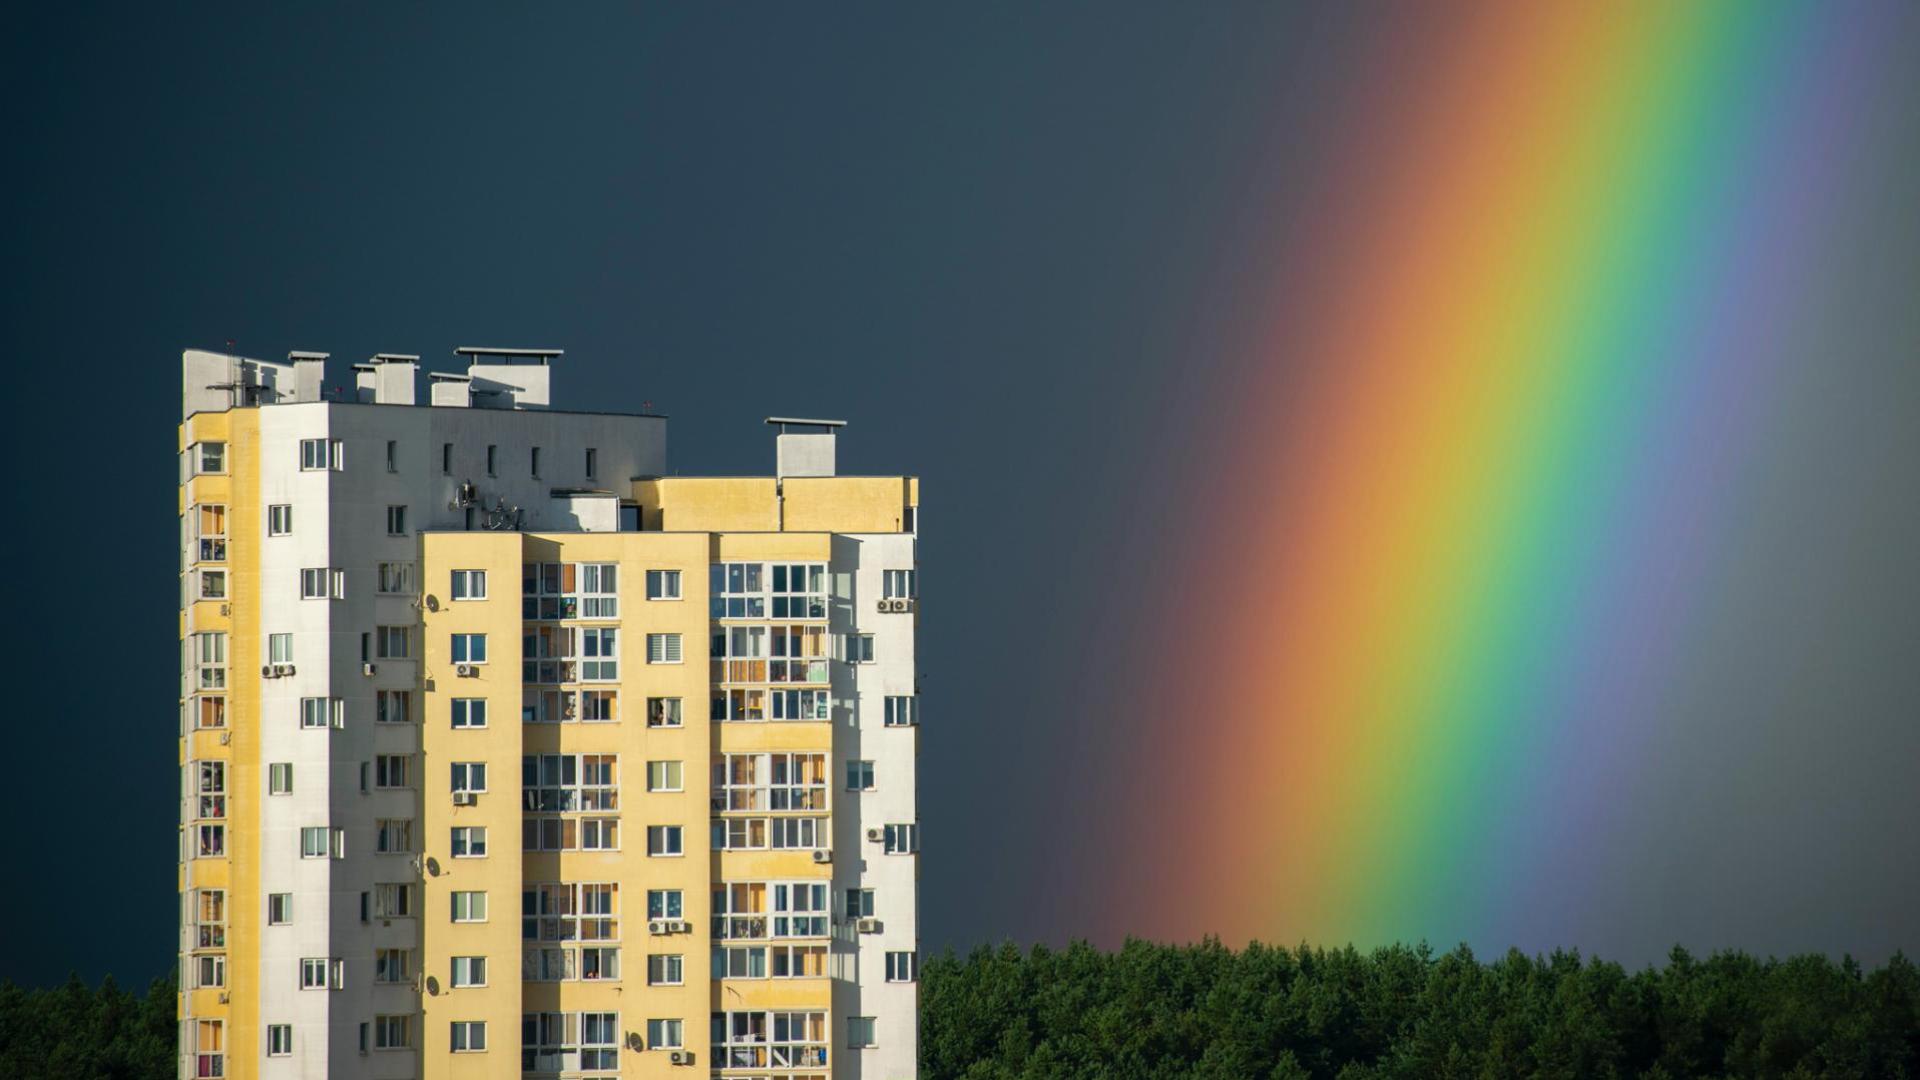 Rainbow over buildings and a forest